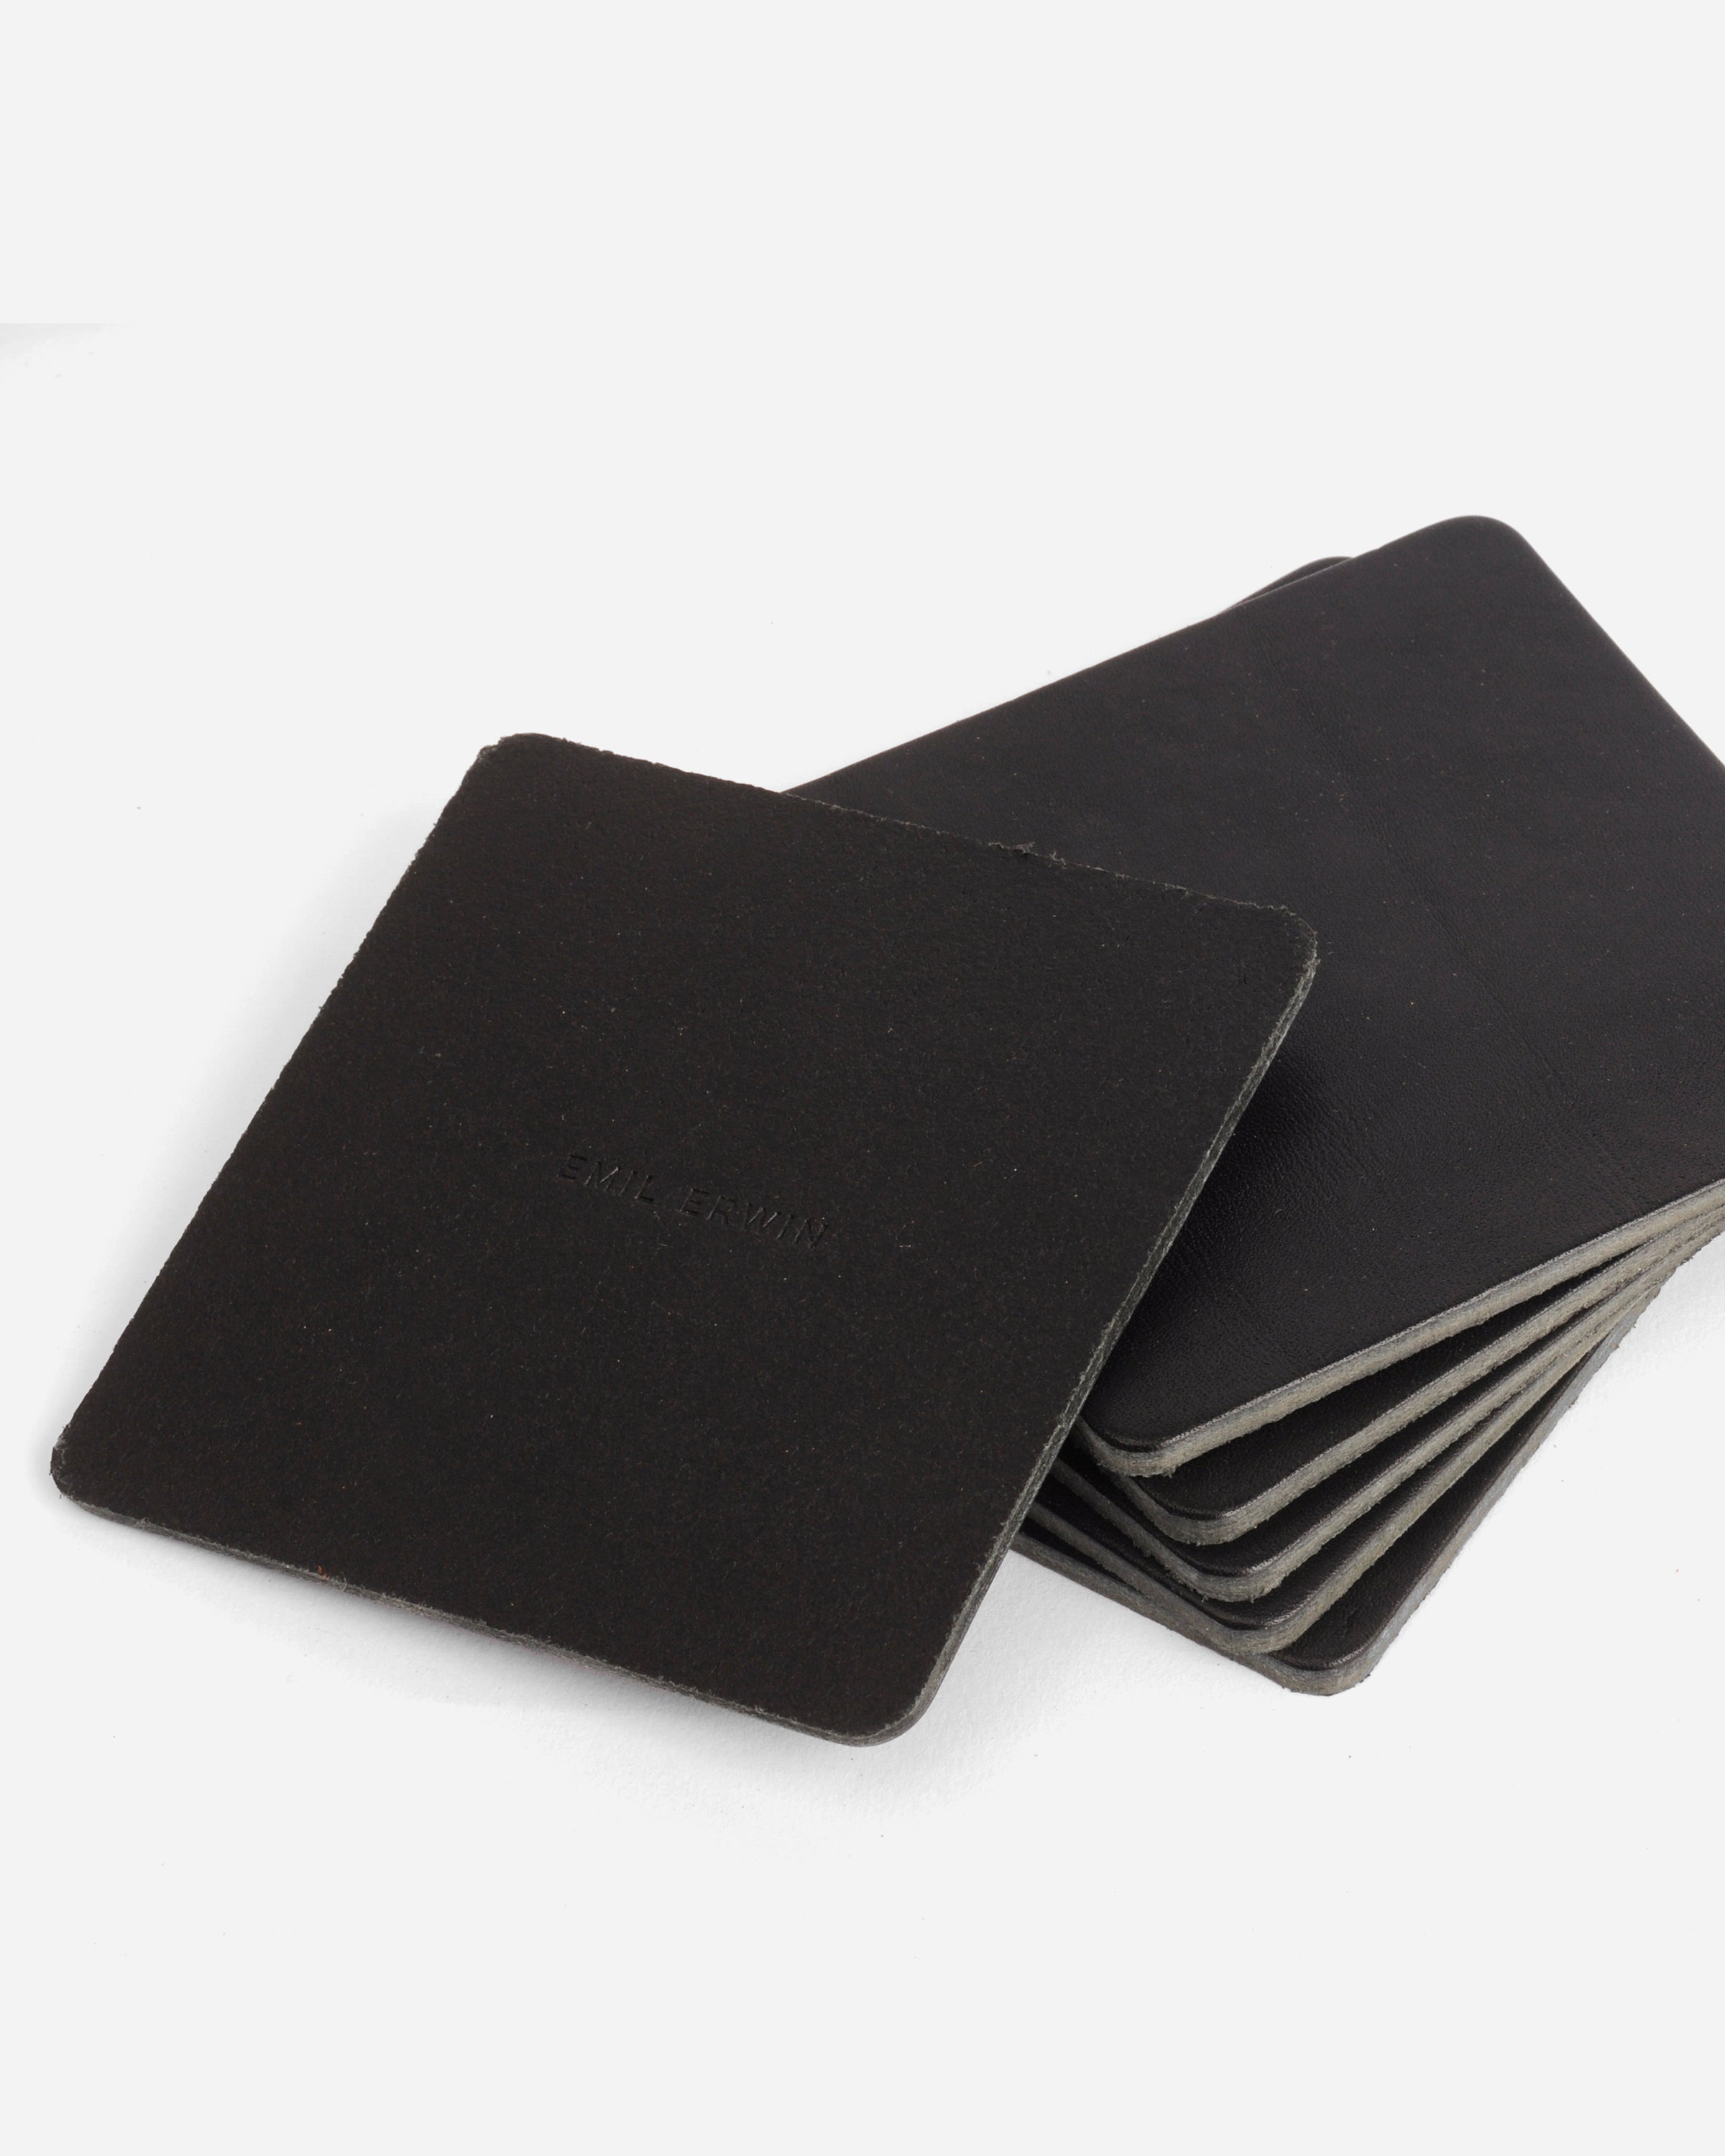 Leather Coasters Square Set of 4, Best & USA Made